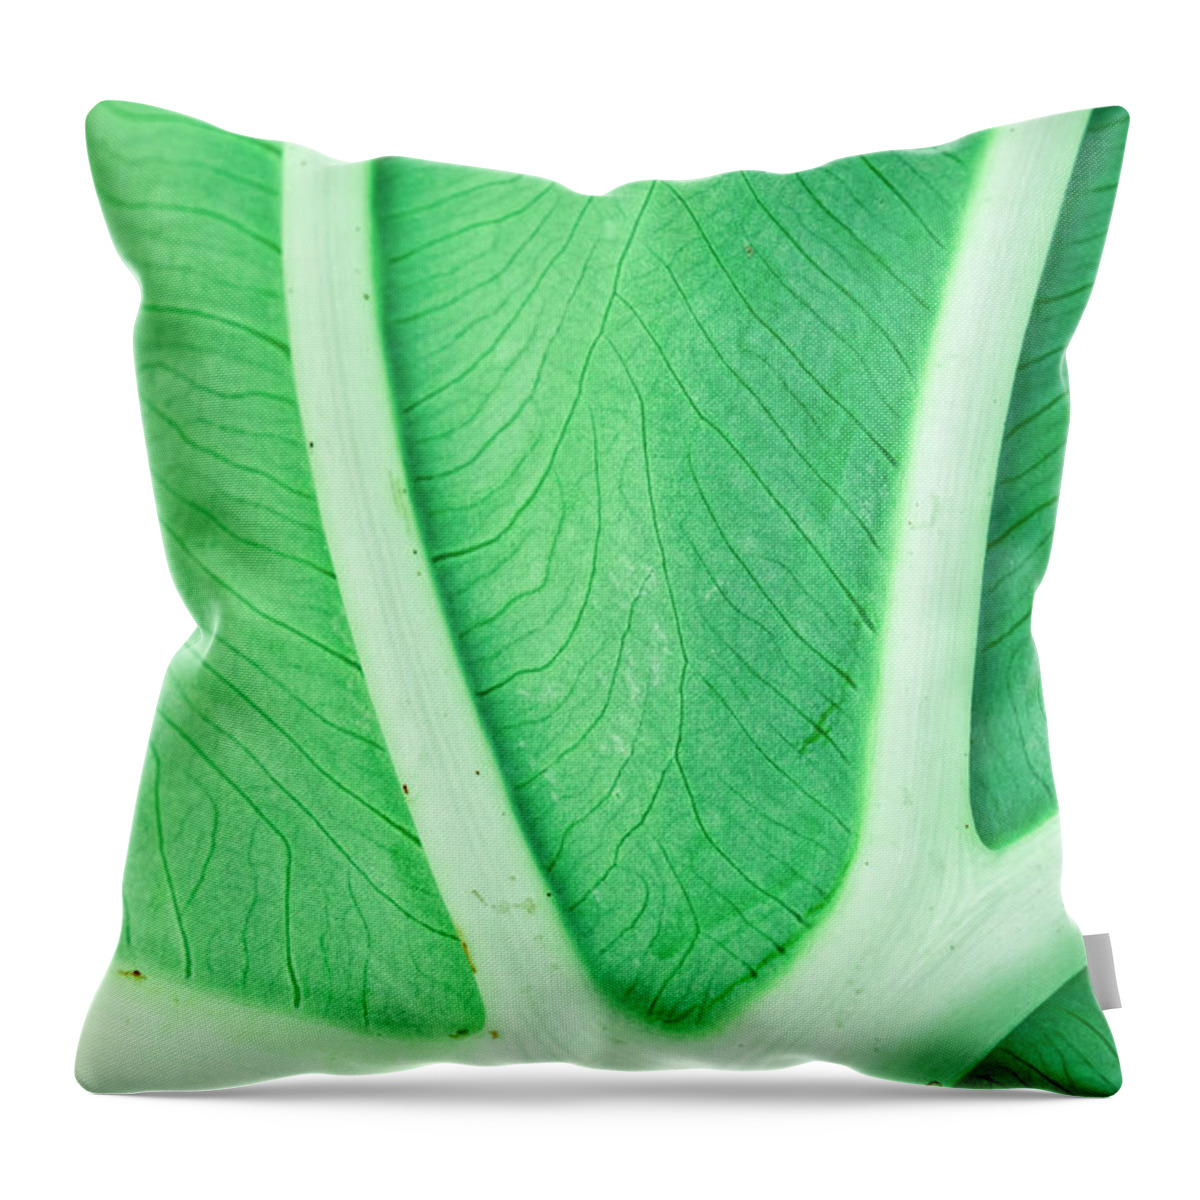 Leaf Throw Pillow featuring the photograph Leaf Macro by Alexey Stiop